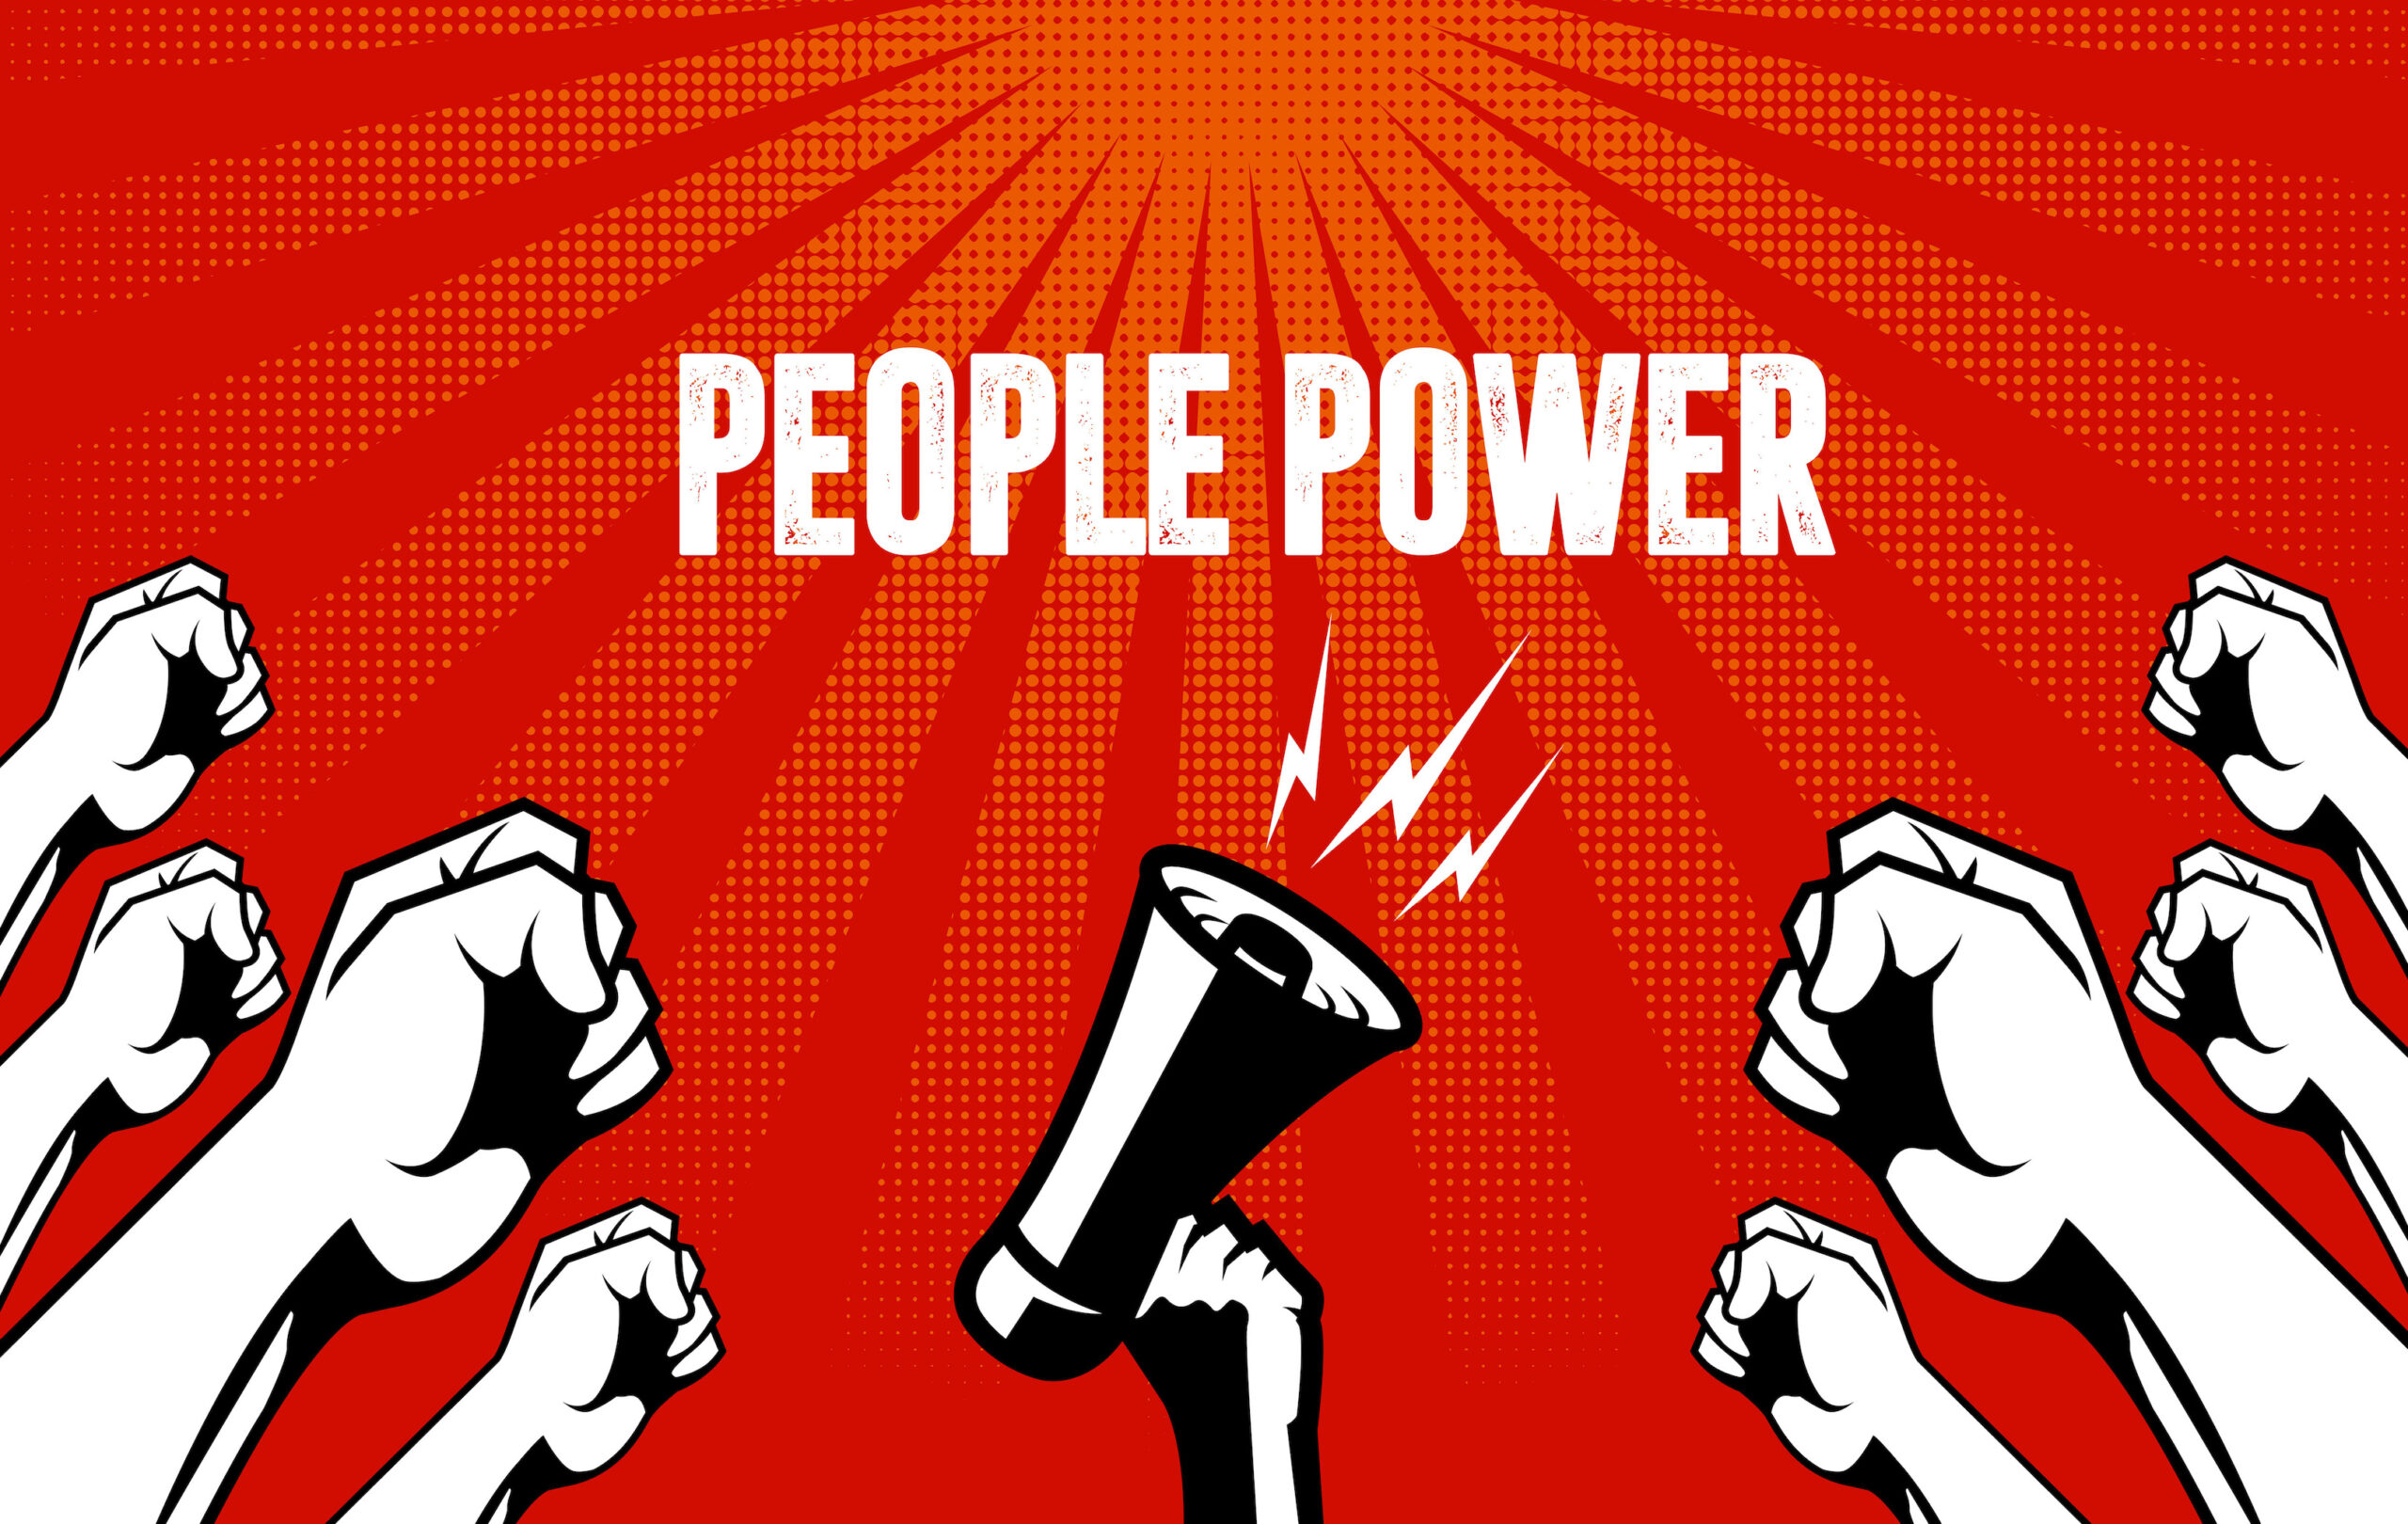 "People Power" against red background with animated image of fists in the air and megaphone